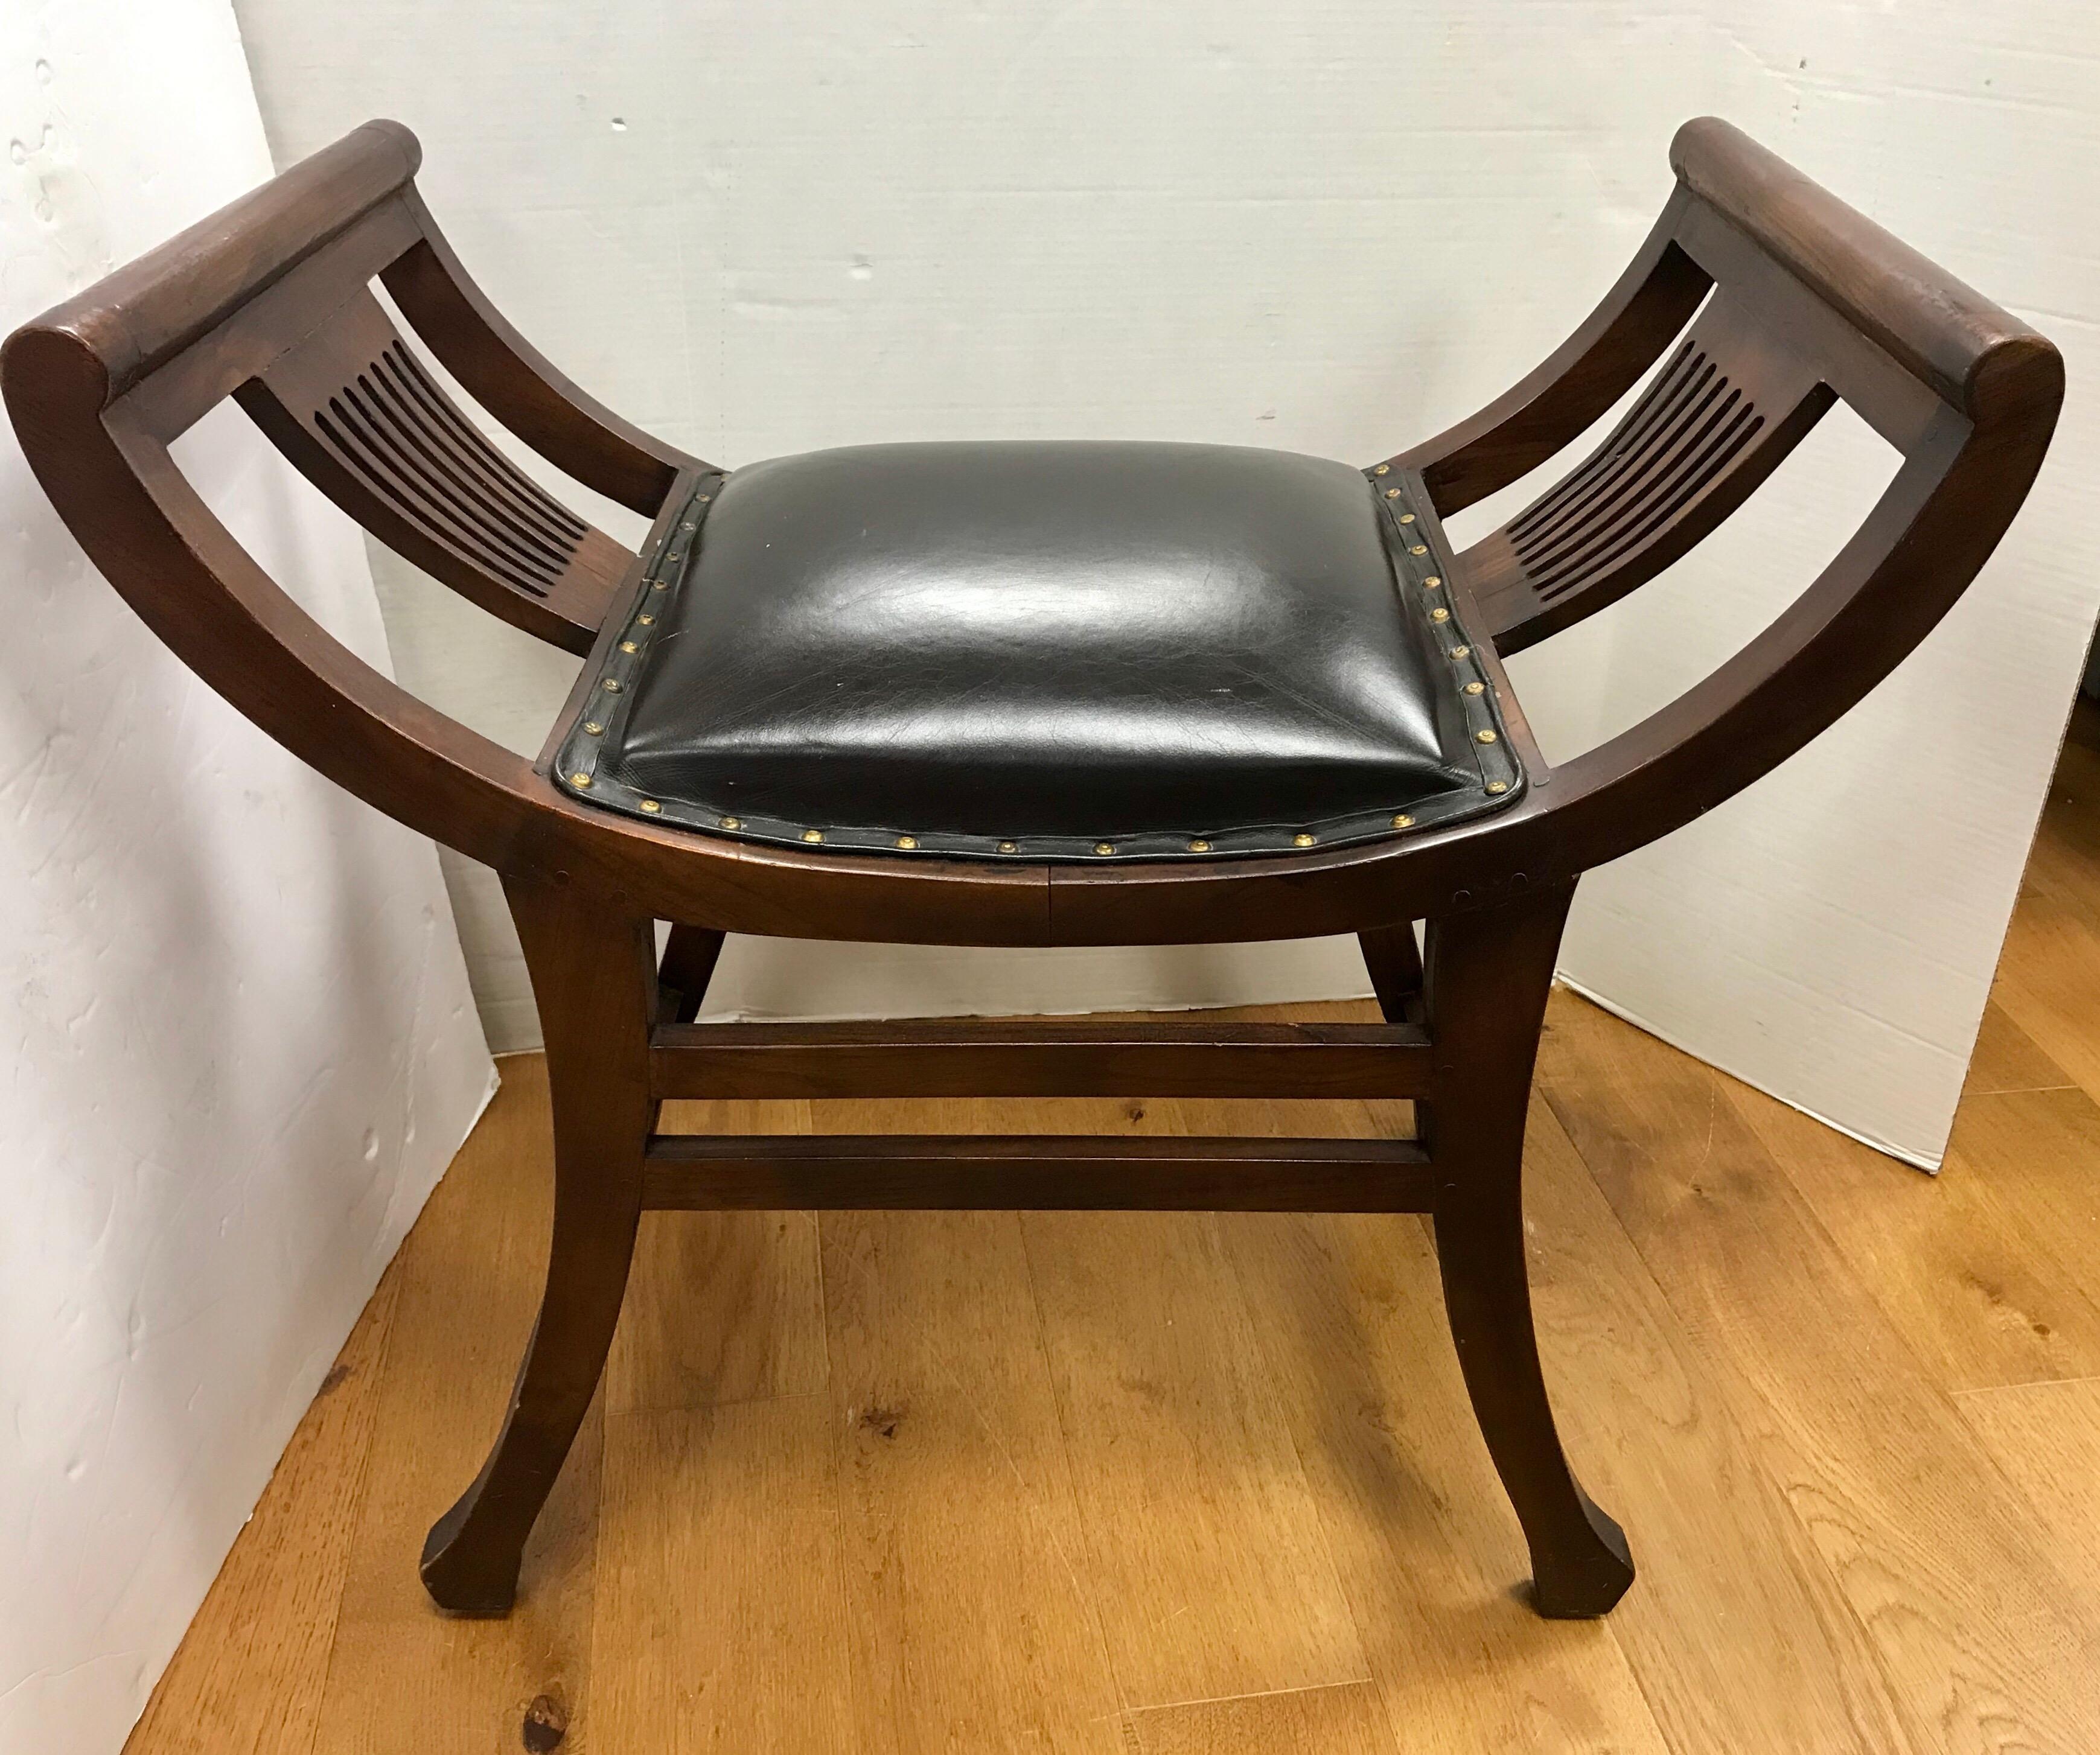 Coveted English leather slatted bench or stool with black leather seat and studs. They are supported with a gorgeous mahogany frame, circa late 19th century, England.